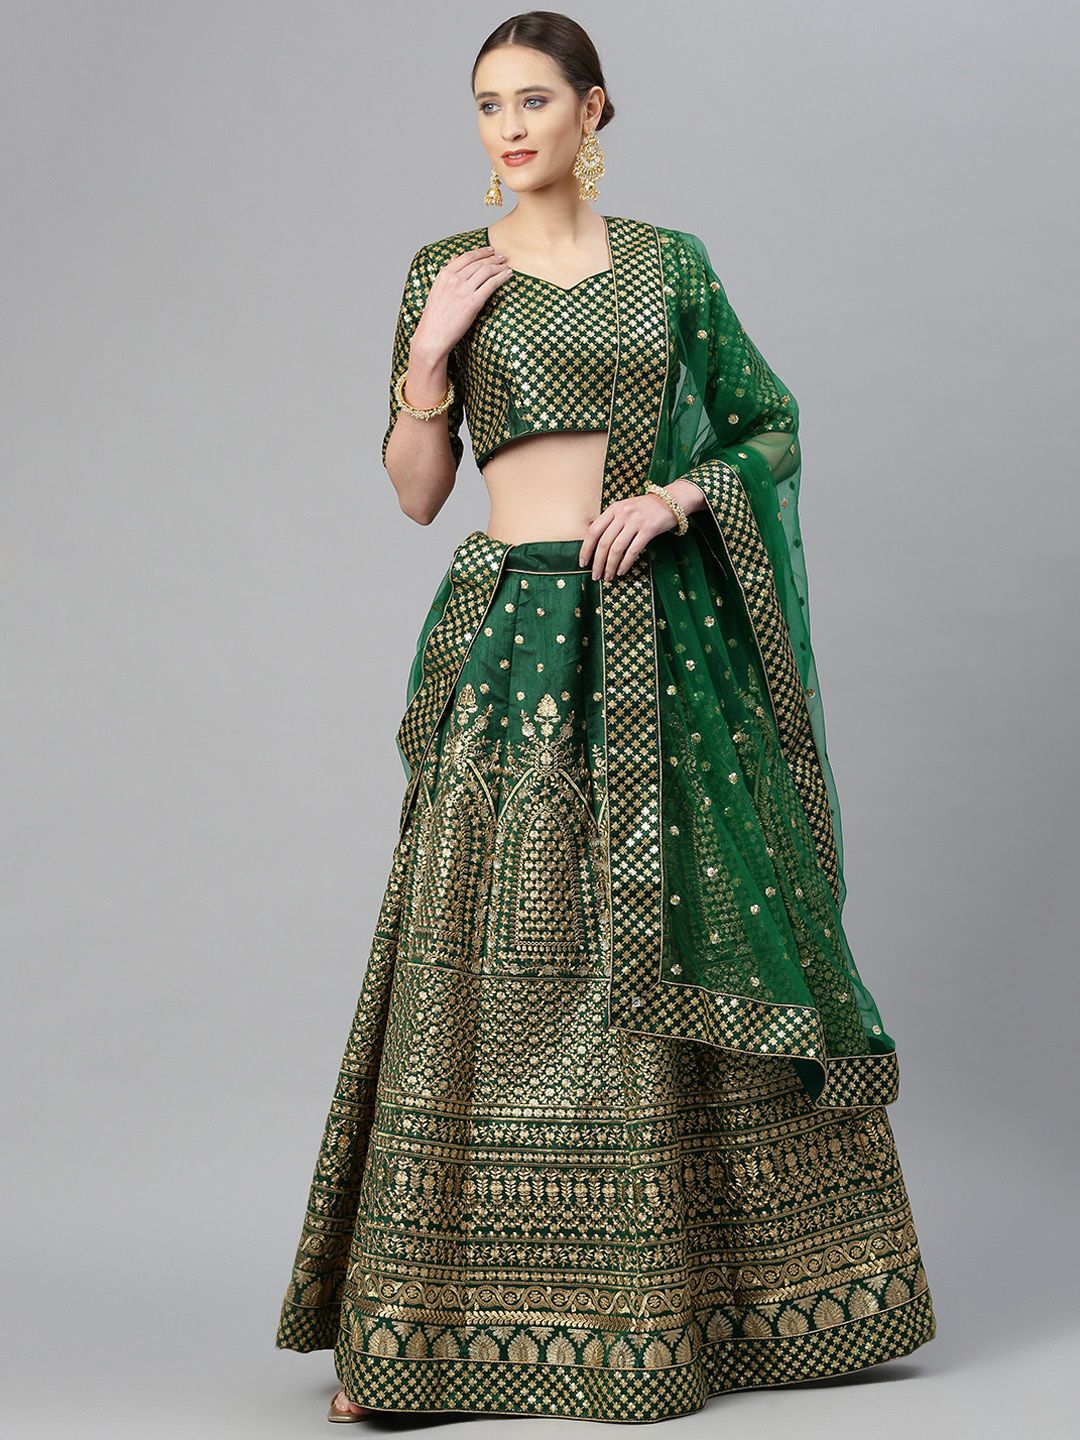 Readiprint Fashions Green & Gold-Toned Sequinned Semi-Stitched Lehenga & Unstitched Blouse Price in India